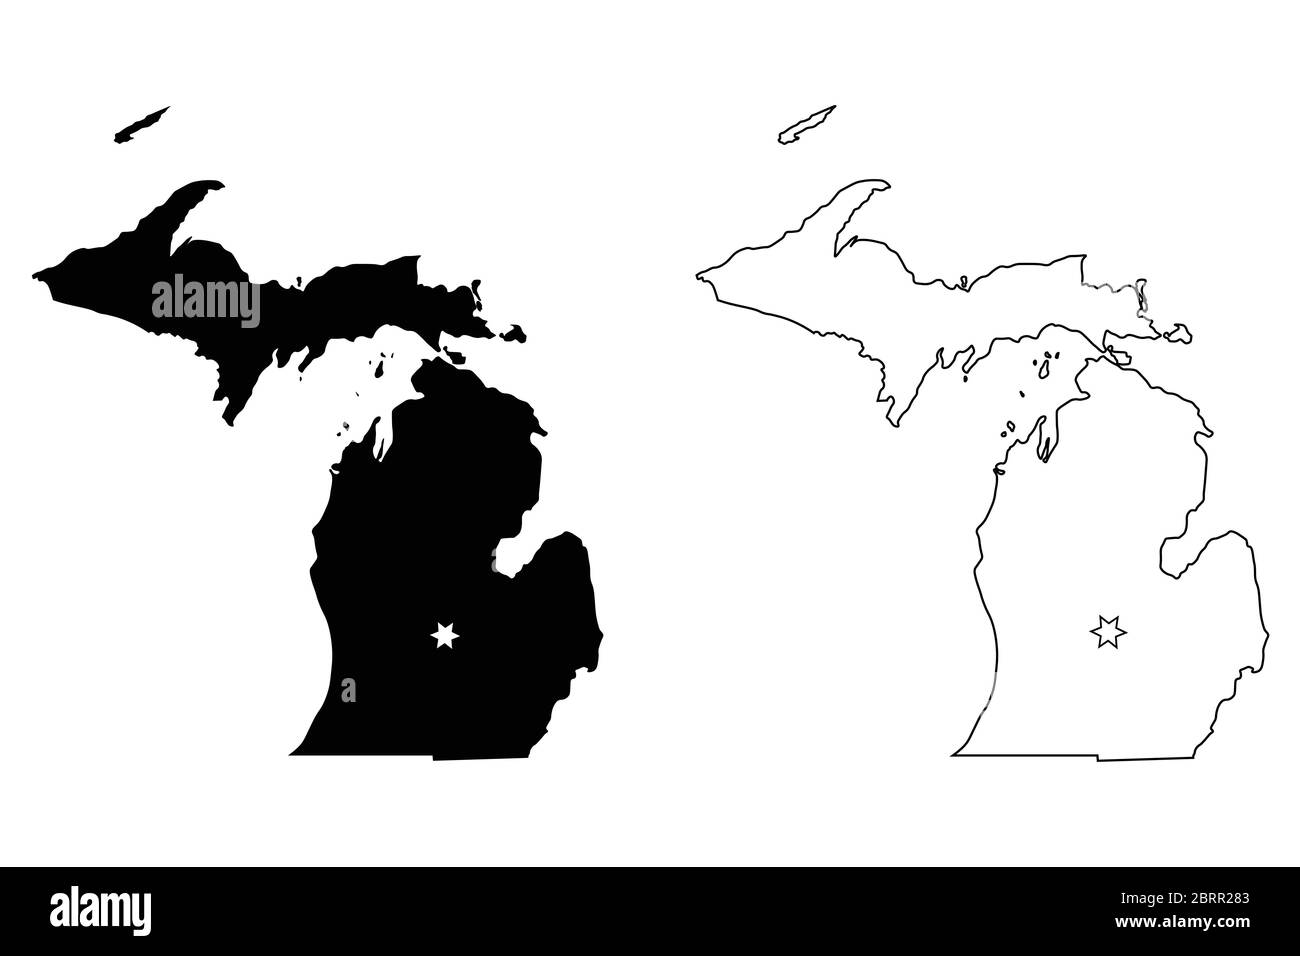 Michigan MI state Map USA with Capital City Star at Lansing. Black silhouette and outline isolated on a white background. EPS Vector Stock Vector